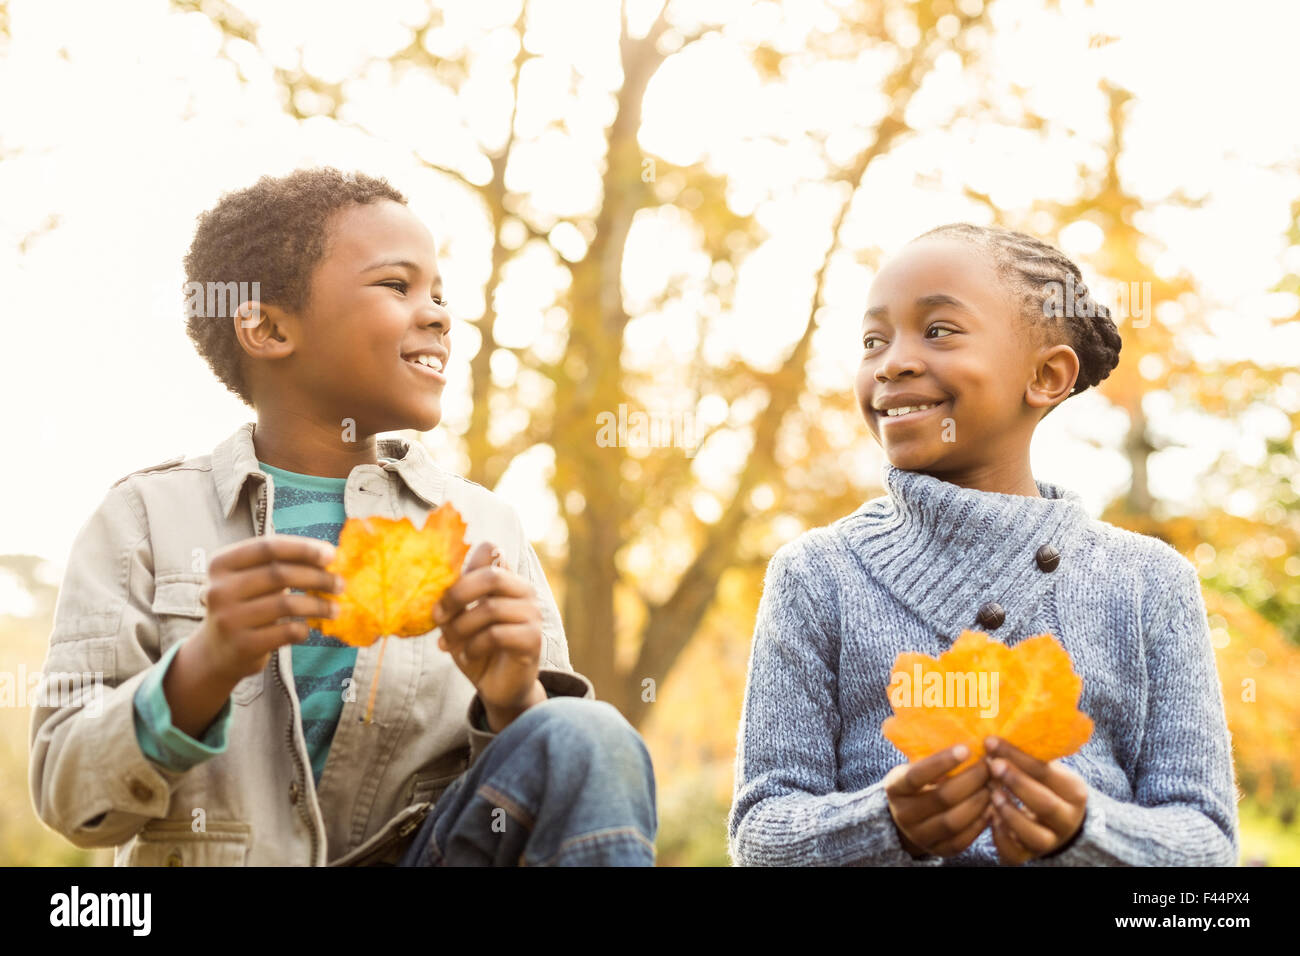 Portrait of young children holding leaves Stock Photo